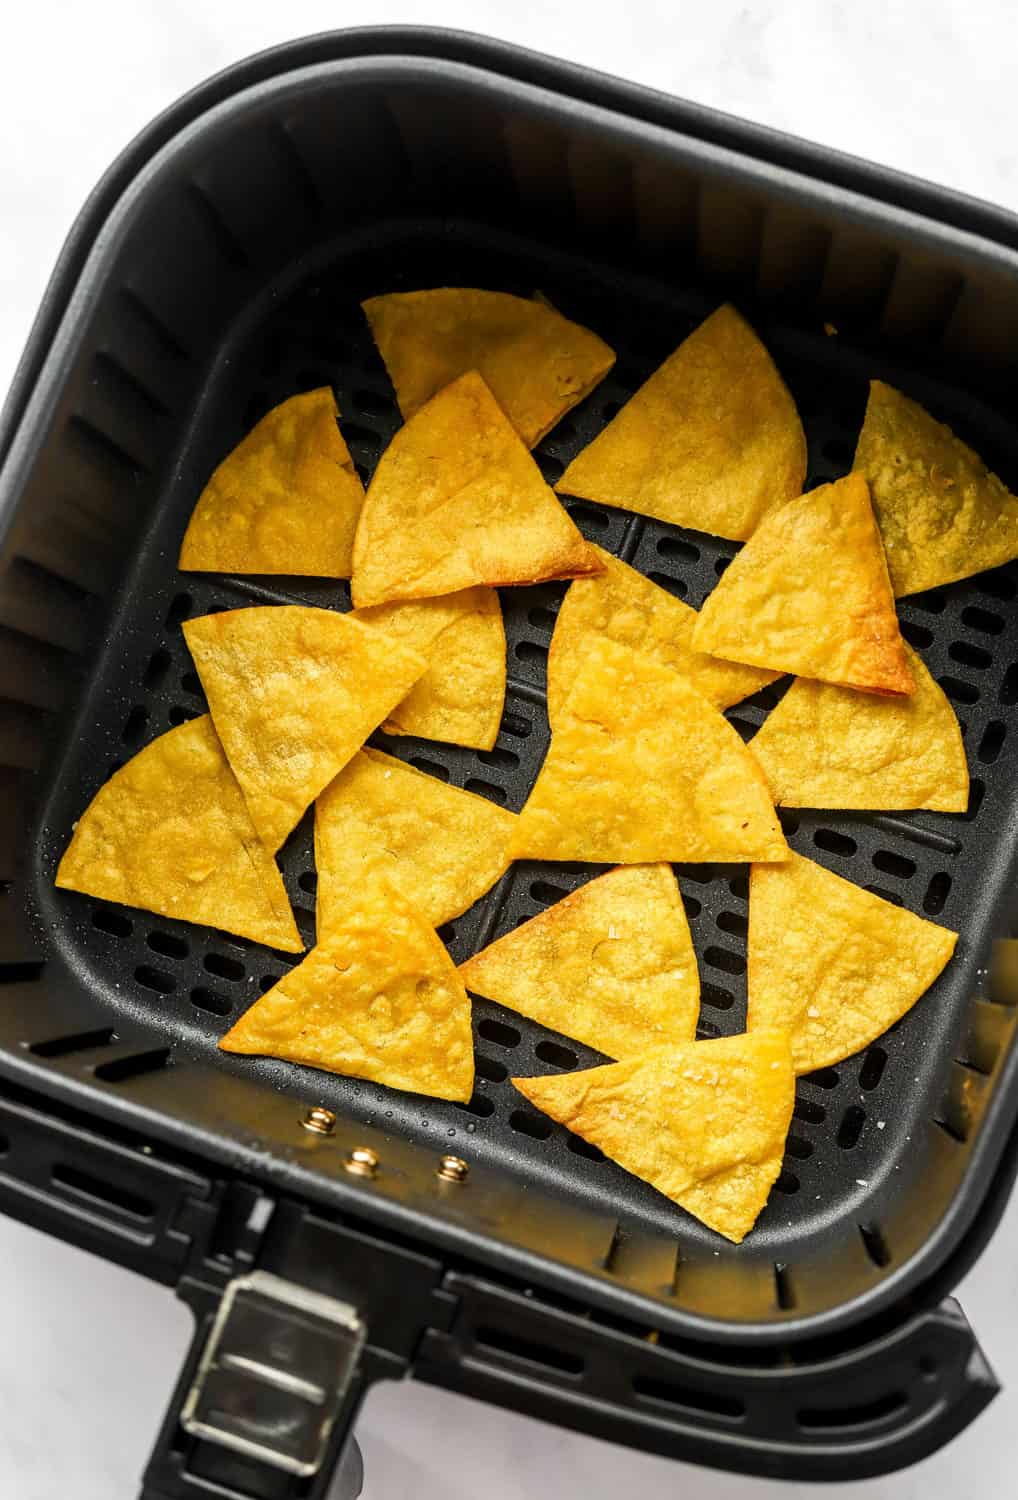 Cooked tortilla chips in a square, black air fryer basket.